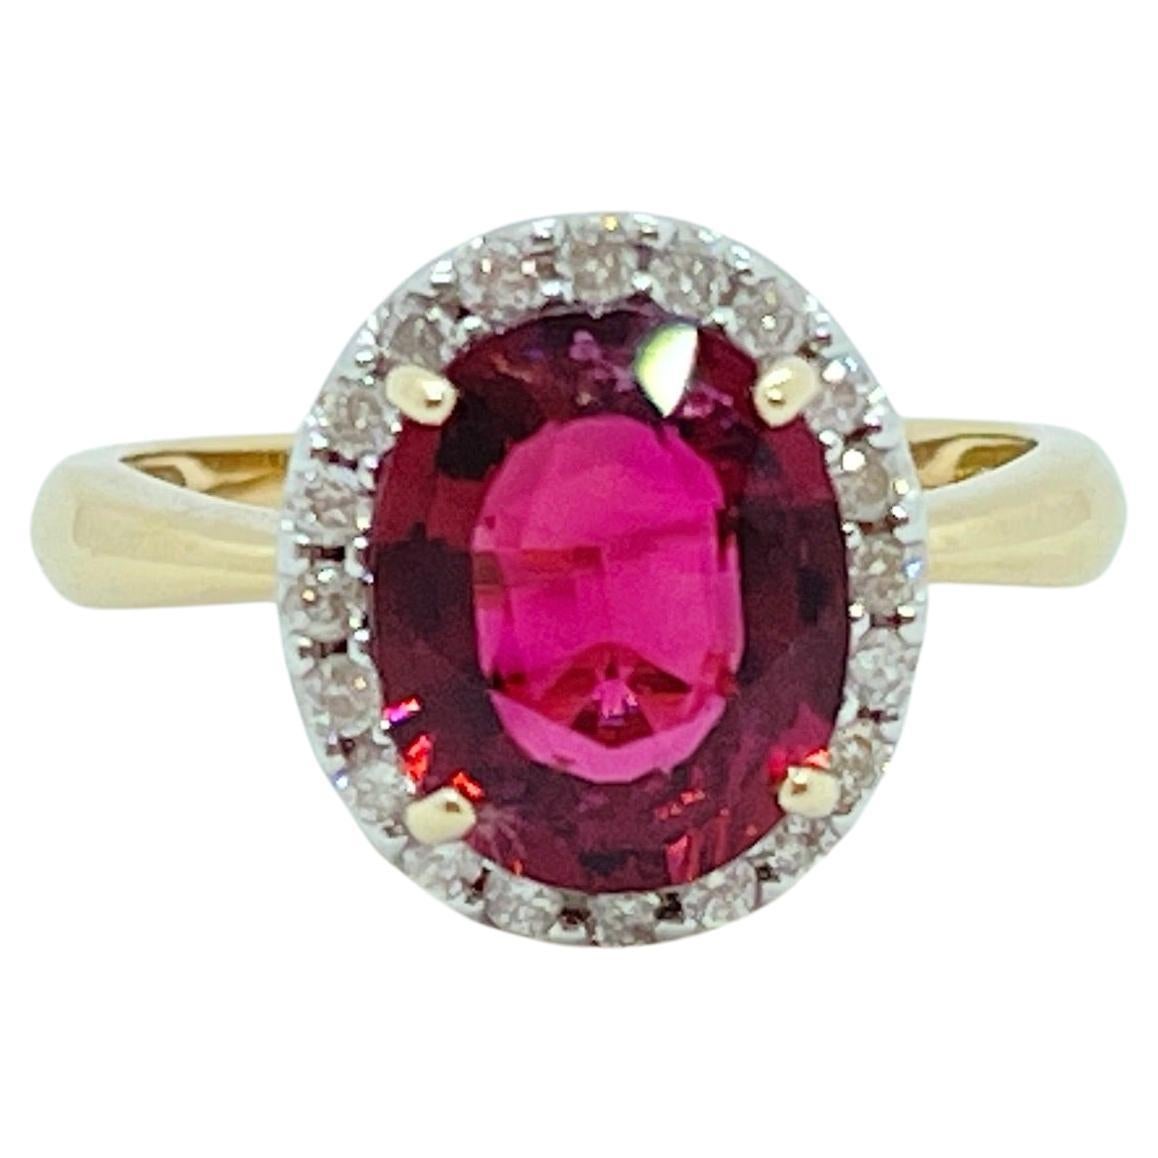 Genuine Natural Rubellite Tourmaline Diamond Halo Ring 9ct Yellow Gold Valuation For Sale